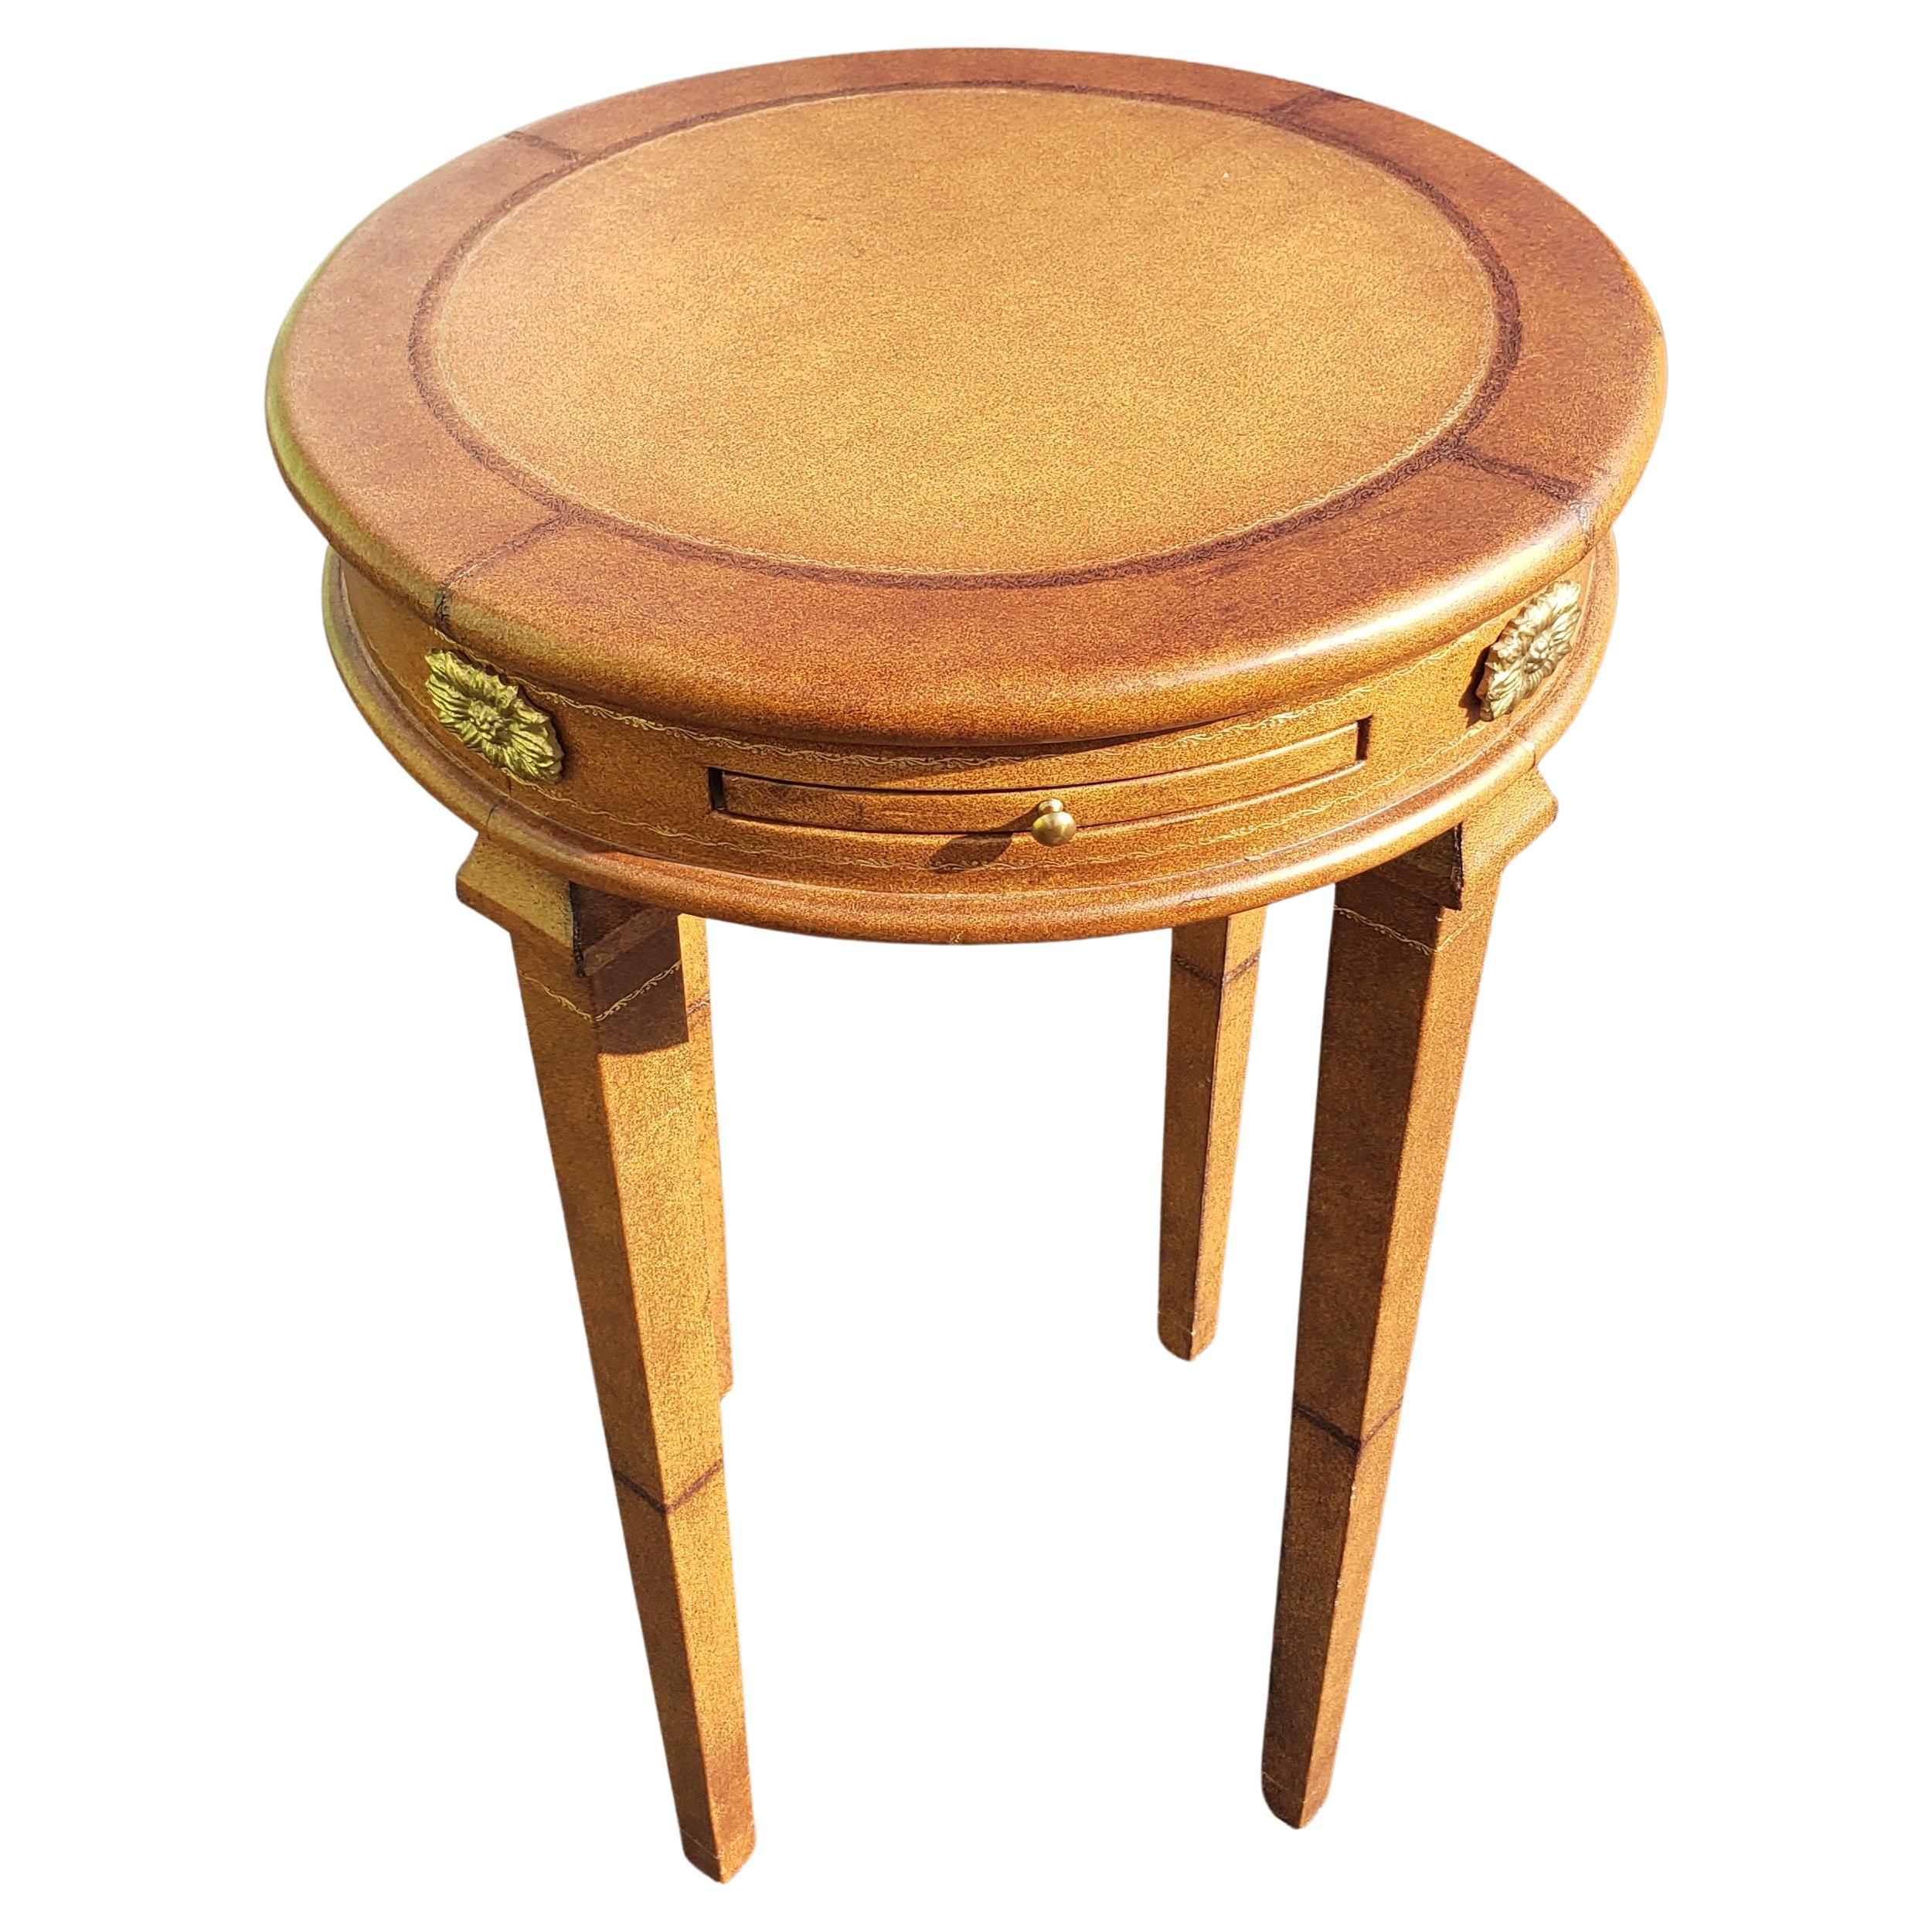 A modern, all leather wrapped and brass mounted Gueridon side table with pull out tray in very good vintage condition. Top, sides and all legs and pull out tray fully with leather.
Measures 18 inches in diameter and stands 28.5 inches tall.